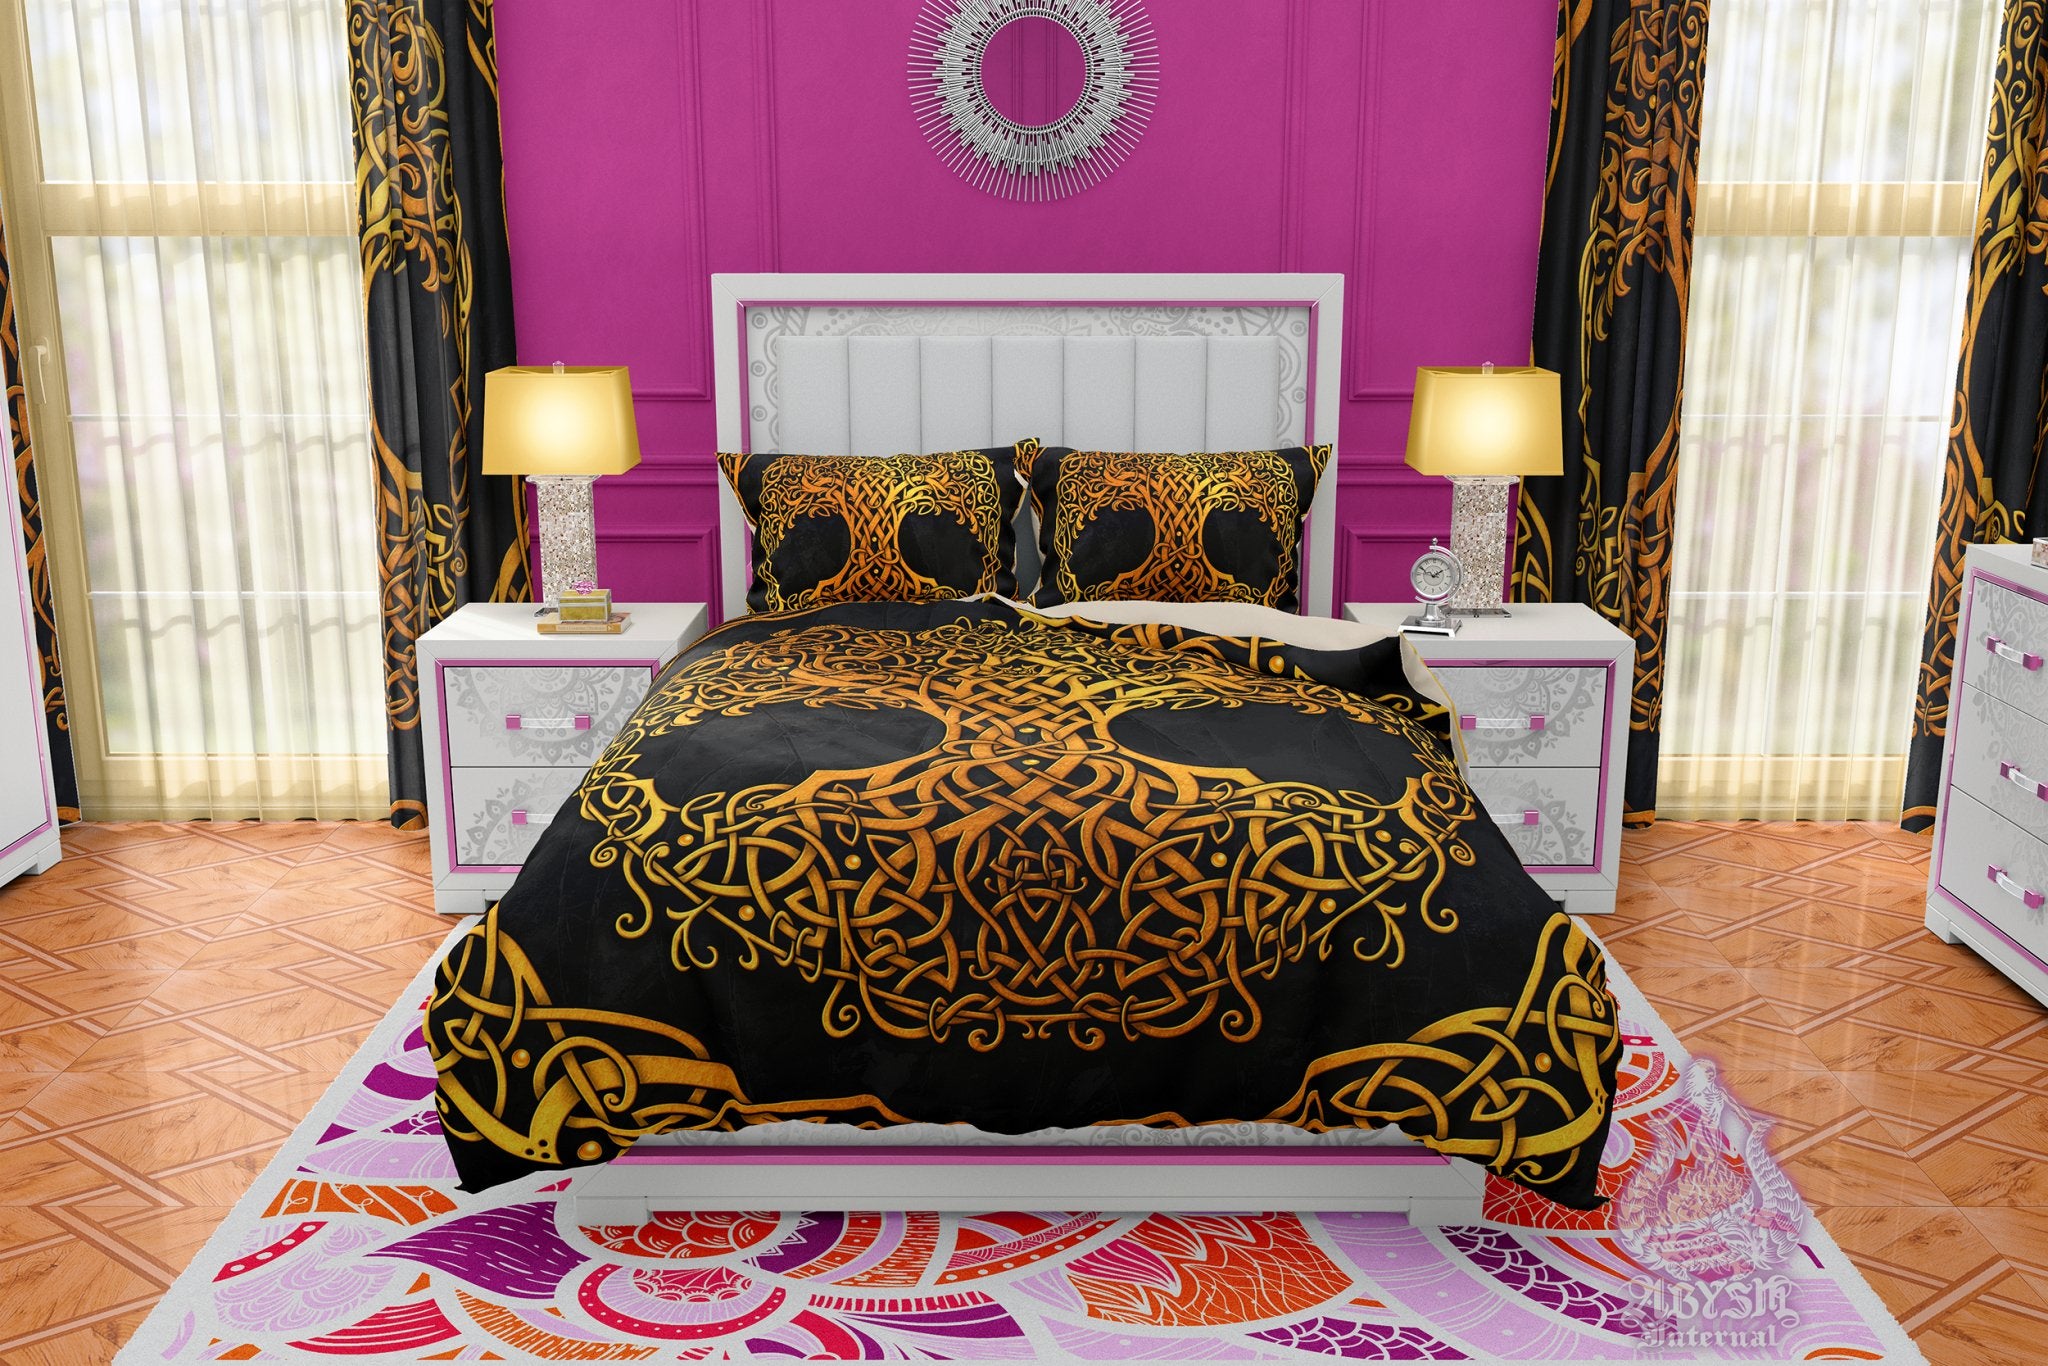 Tree of Life Bed Cover, Indie Bedding Set, Comforter or Duvet, Witchy Bedroom Decor King, Queen & Twin Size - Celtic, Gold and 3 Colors: Green, Purple, Black - Abysm Internal